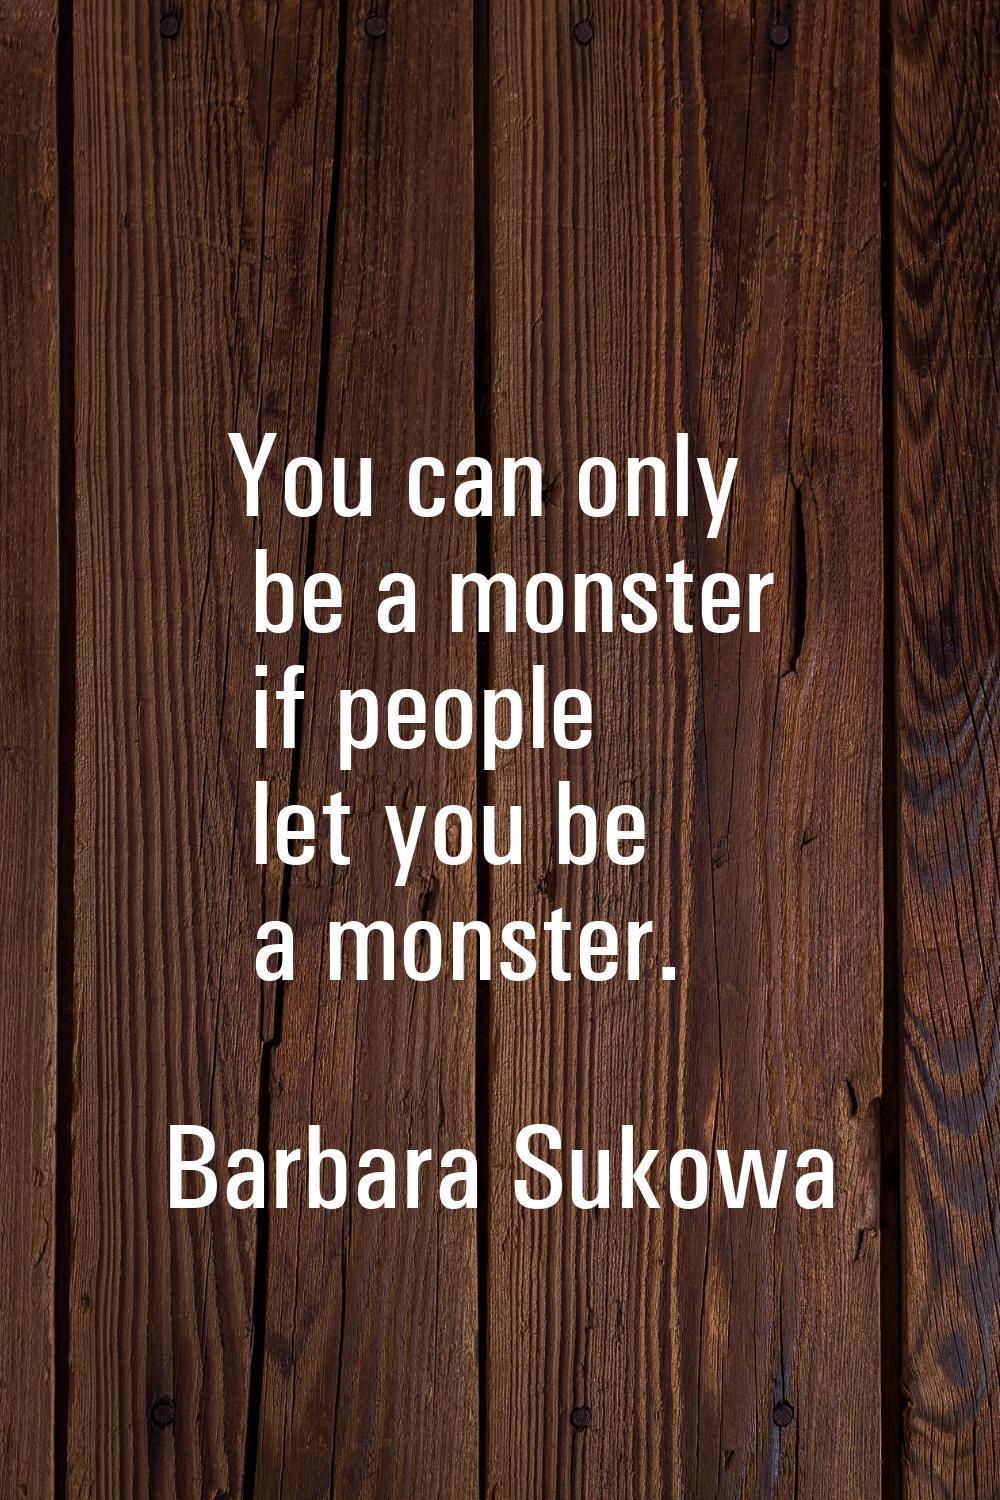 You can only be a monster if people let you be a monster.